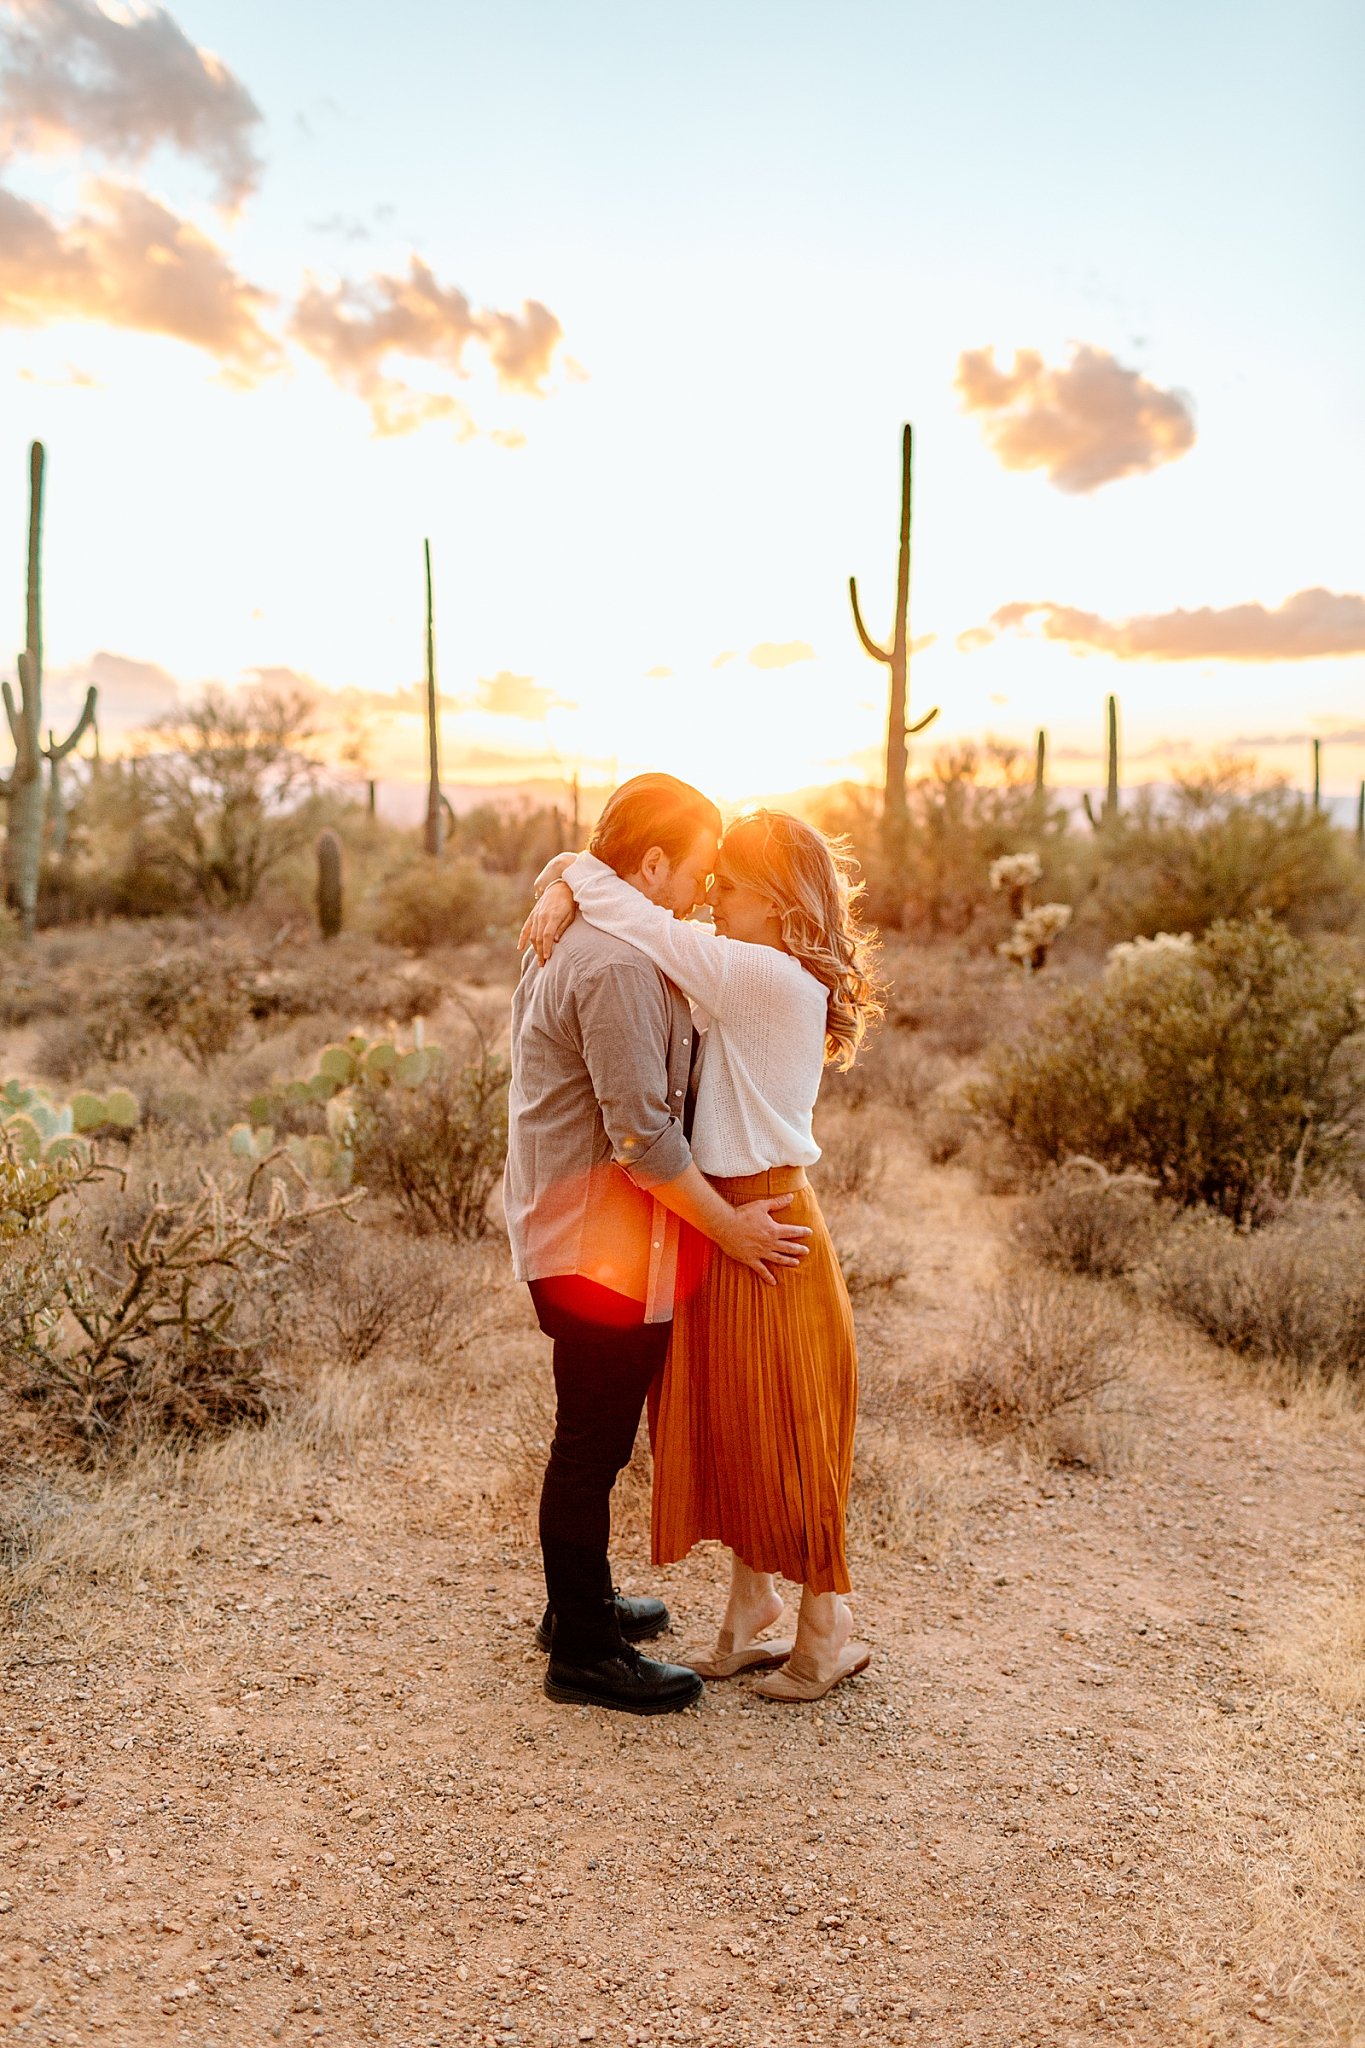  couple embraces and kisses in from of bright shinning sun by Arizona Couples Photographer 